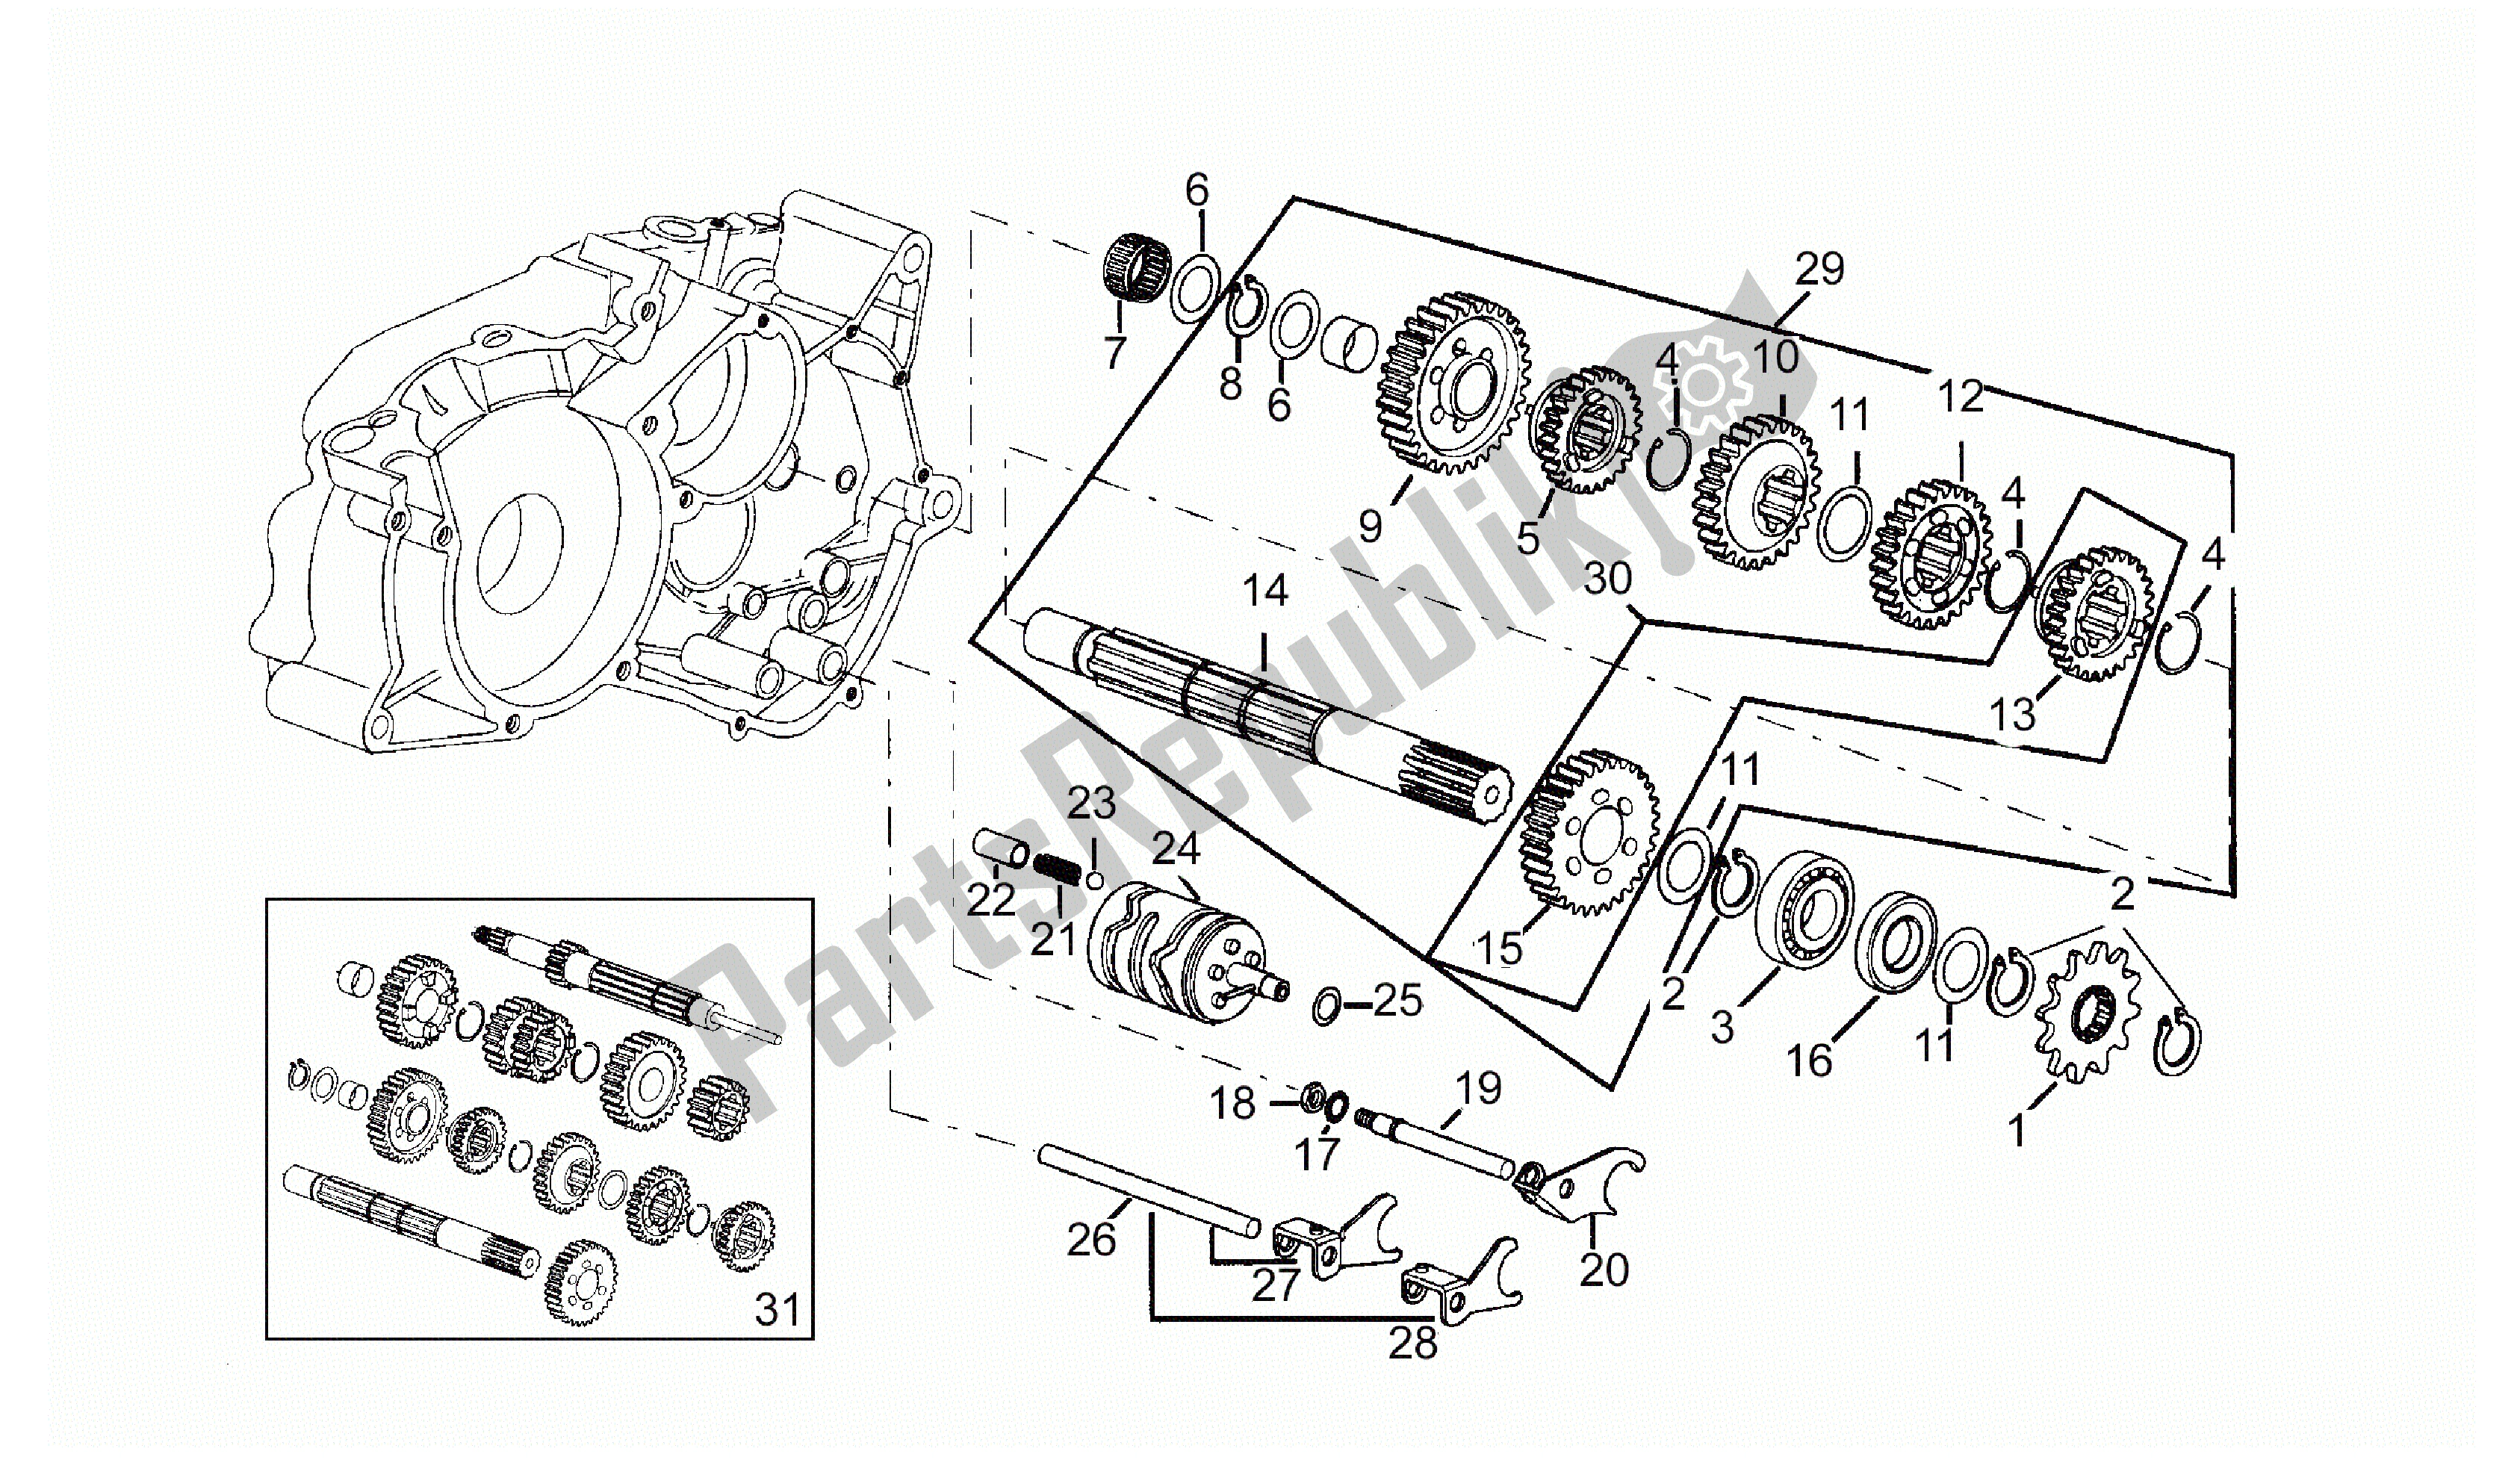 All parts for the Driven Shaft - 6 Gears of the Aprilia RX 50 1995 - 2000